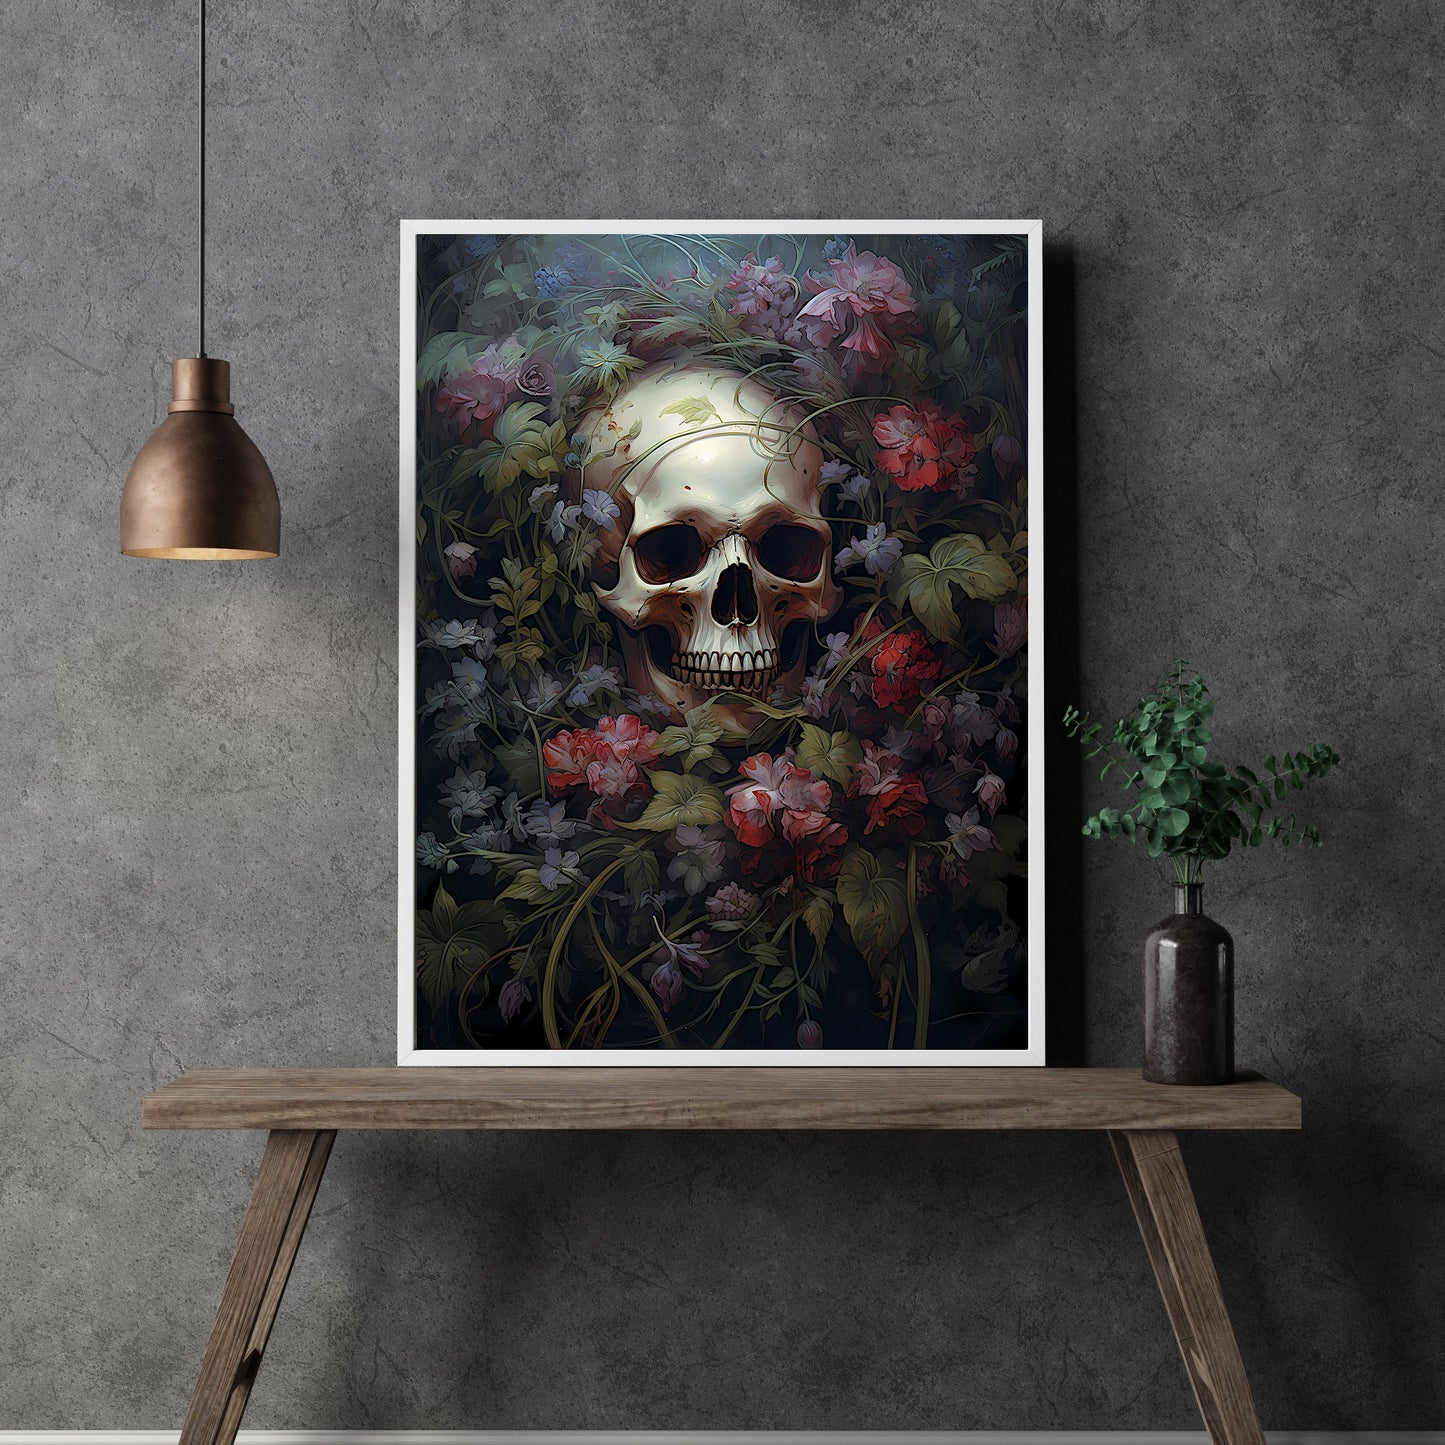 Skull lying in a Bed of Flowers Paper Poster Prints Wall Art Poster, perfect for Decoration of a Dark Room with a witchy nostalgic touch.